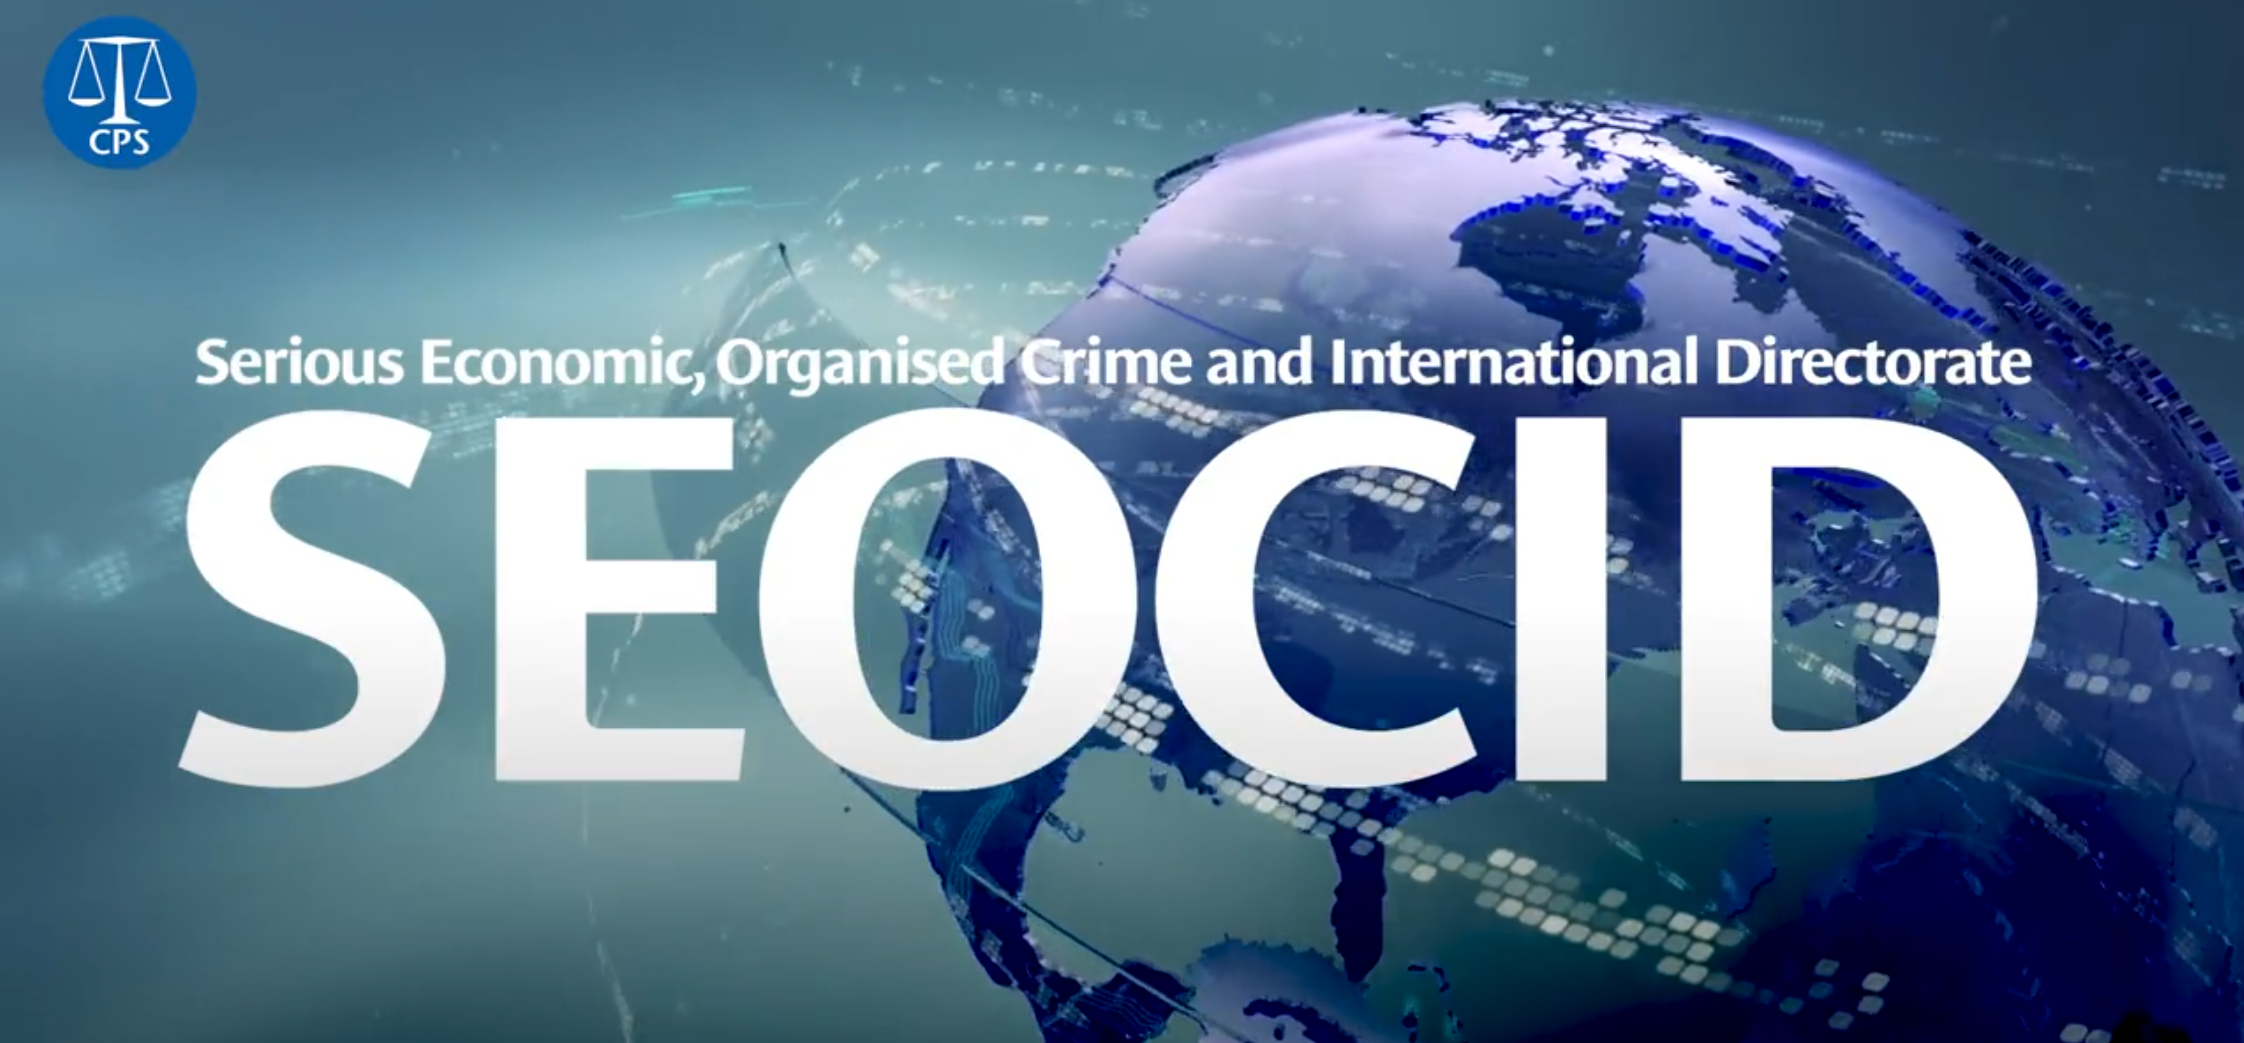 SEOCID: The Serious Economic, Organised Crime and International Directorate